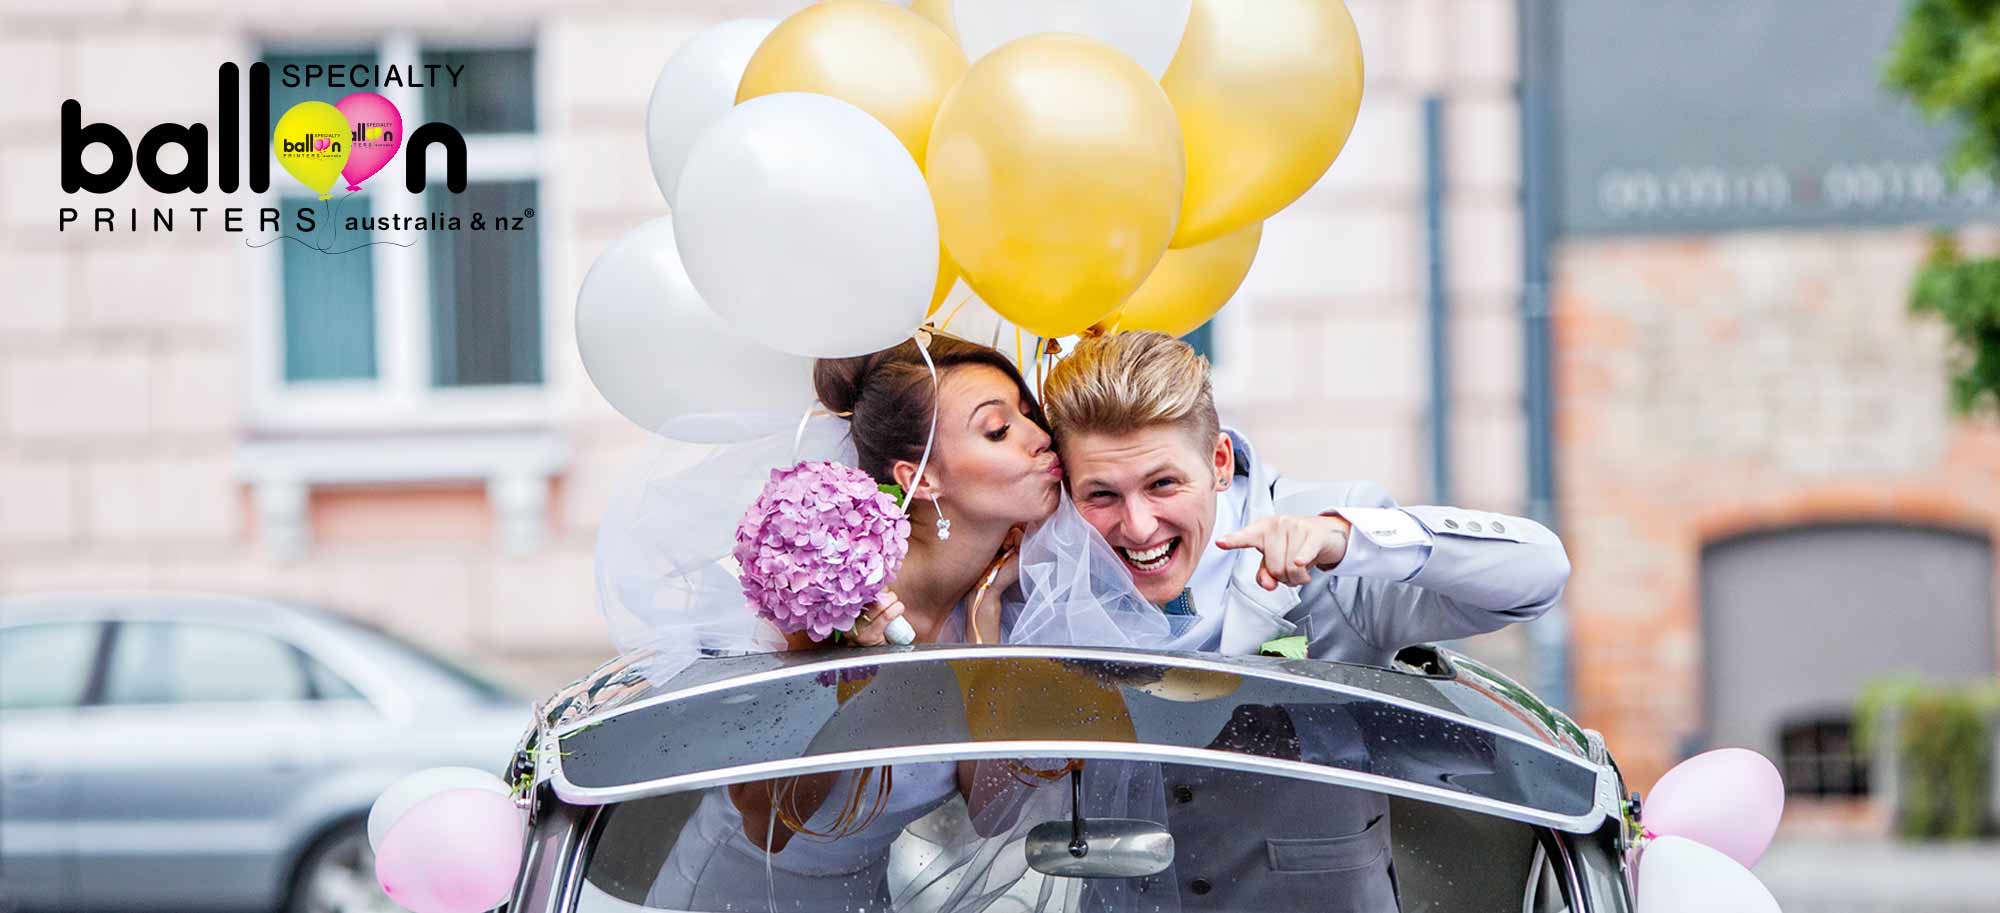 Specialty Balloon Printers 7 Unique Ways To Use Balloons At Your Wedding